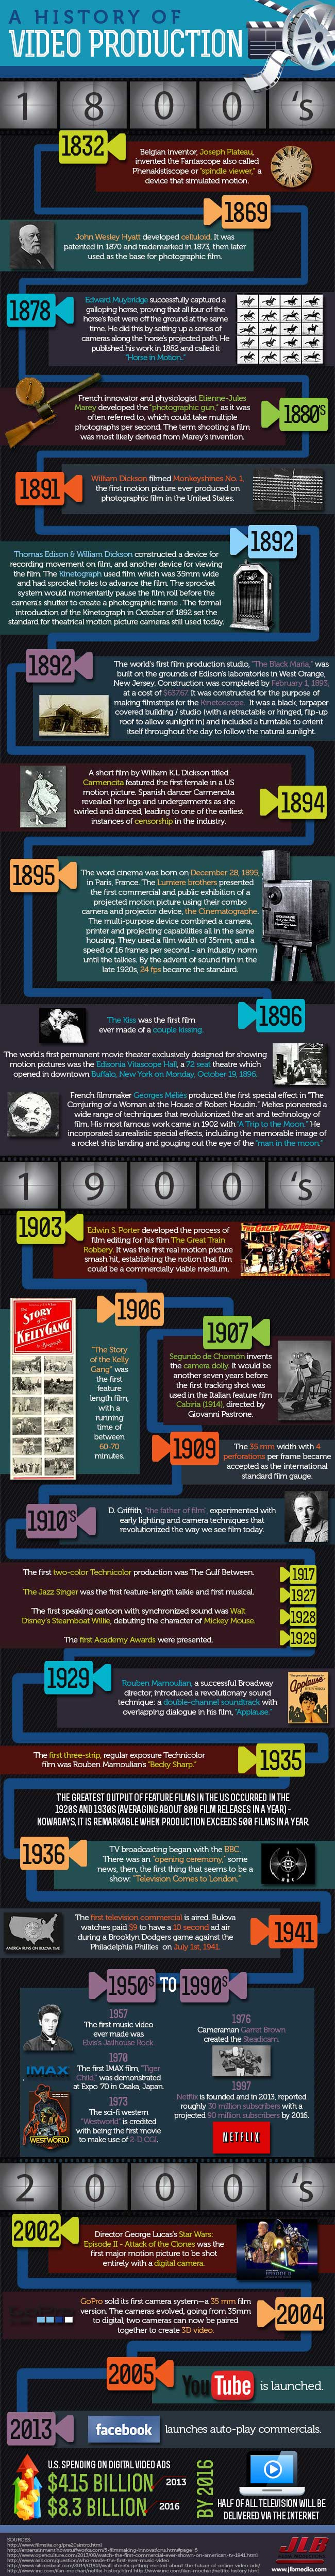 history infographic video